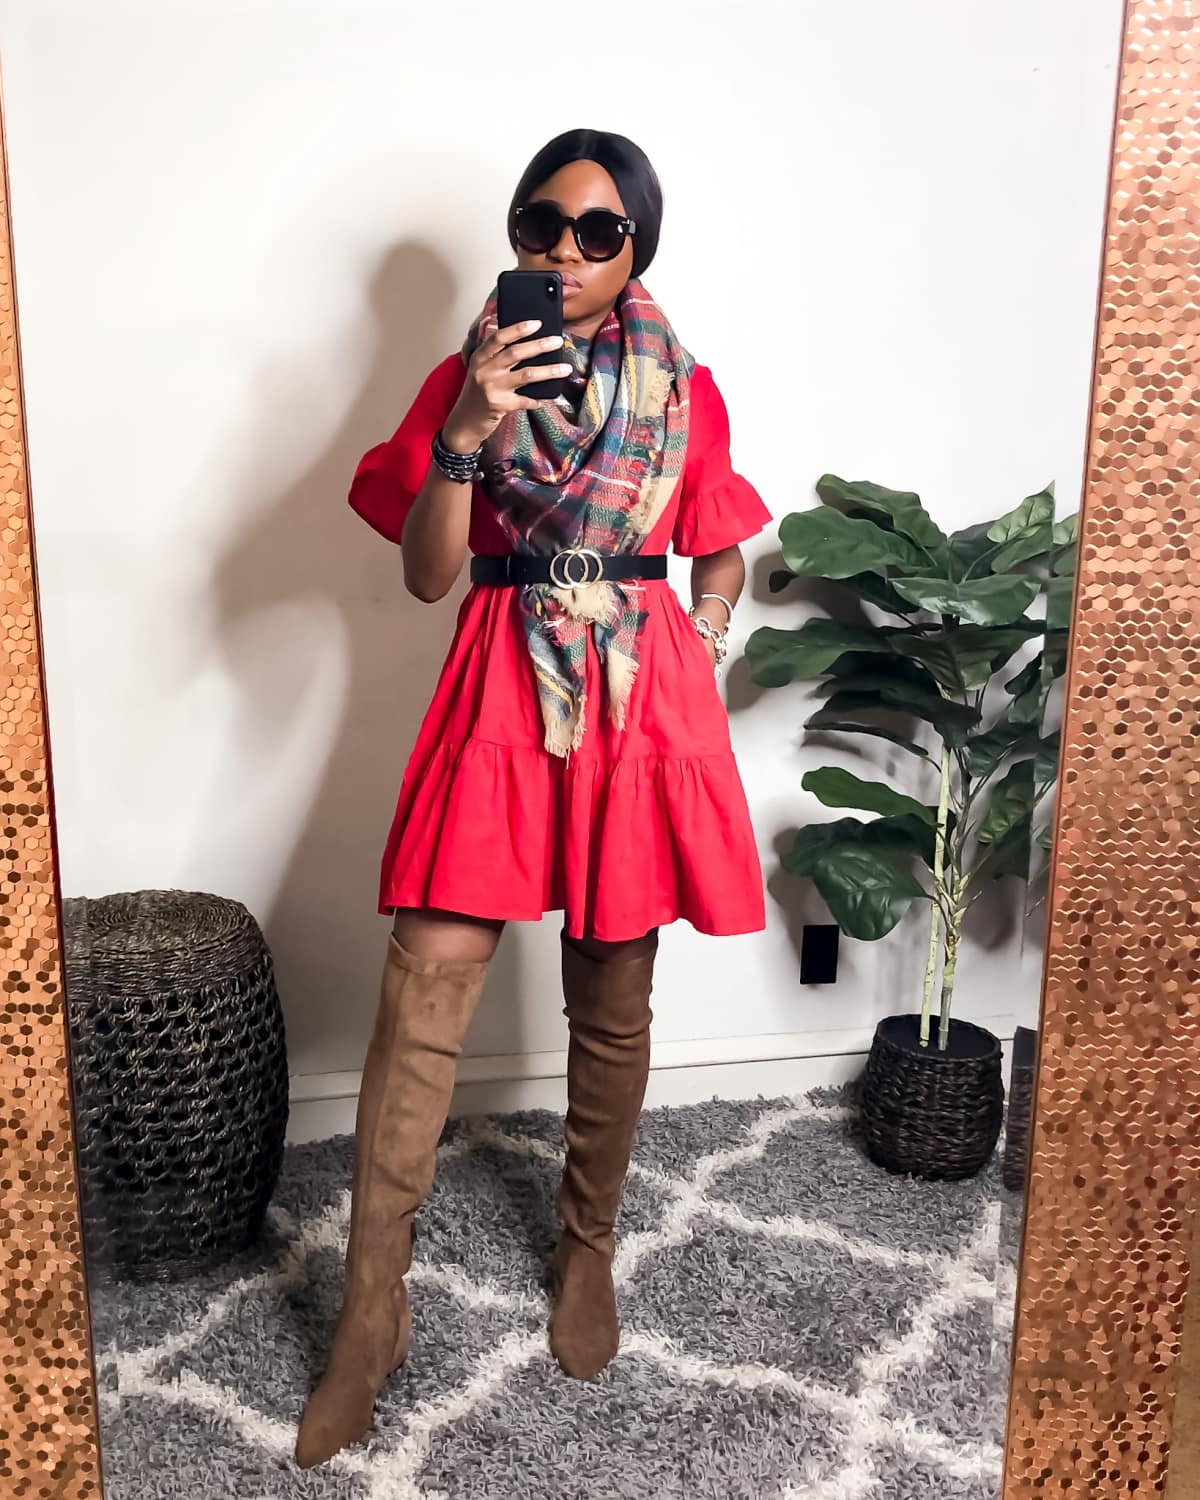 Whether you’re looking for a stylish outfit for work or play, you’ll love this on-trend red dress outfit ideas to take you from work or brunch to date night and more.